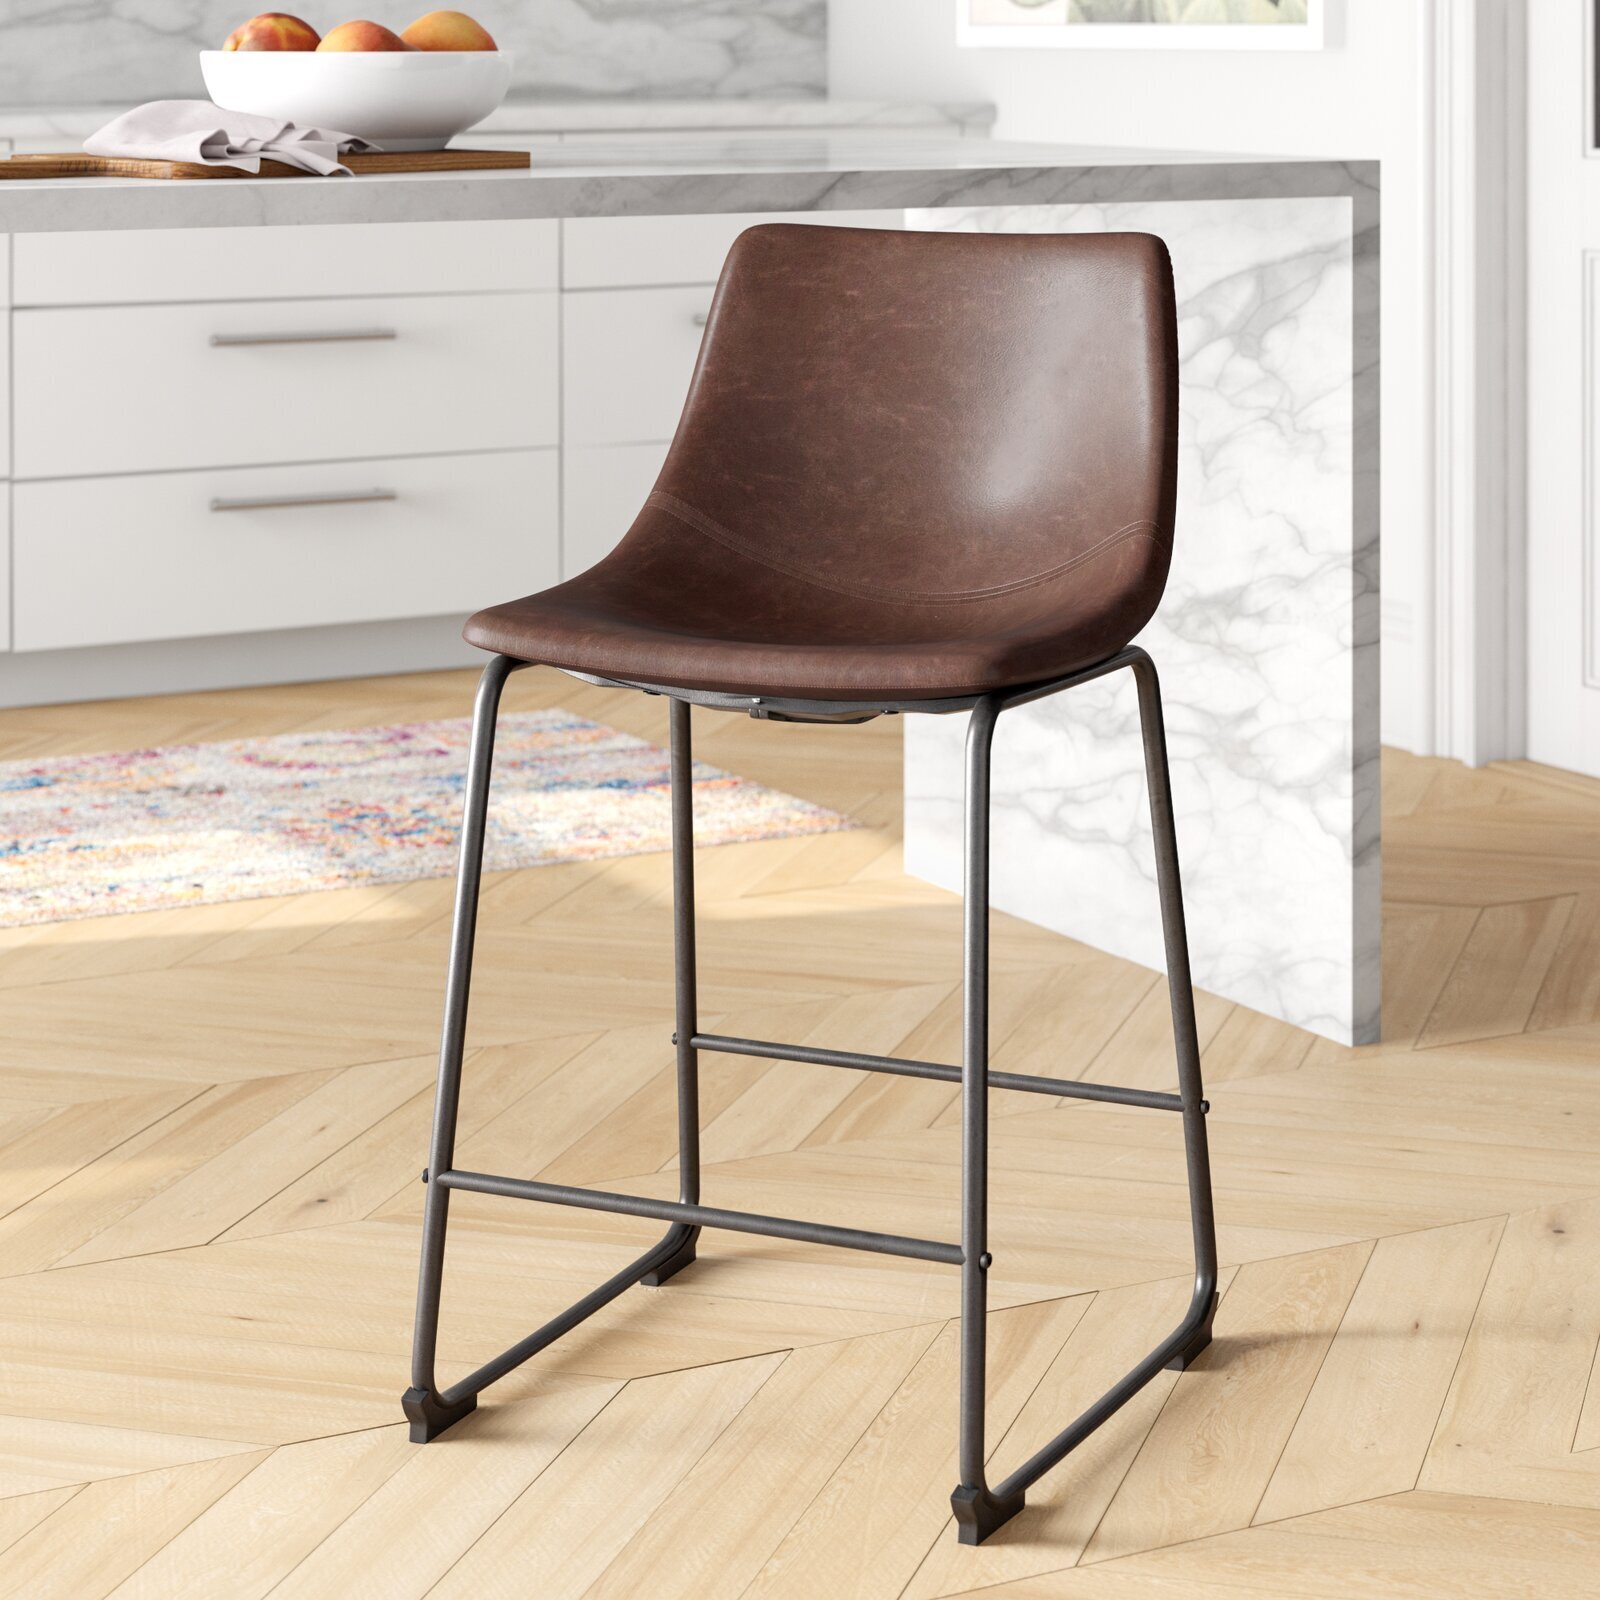 Distressed Faux Leather Stool